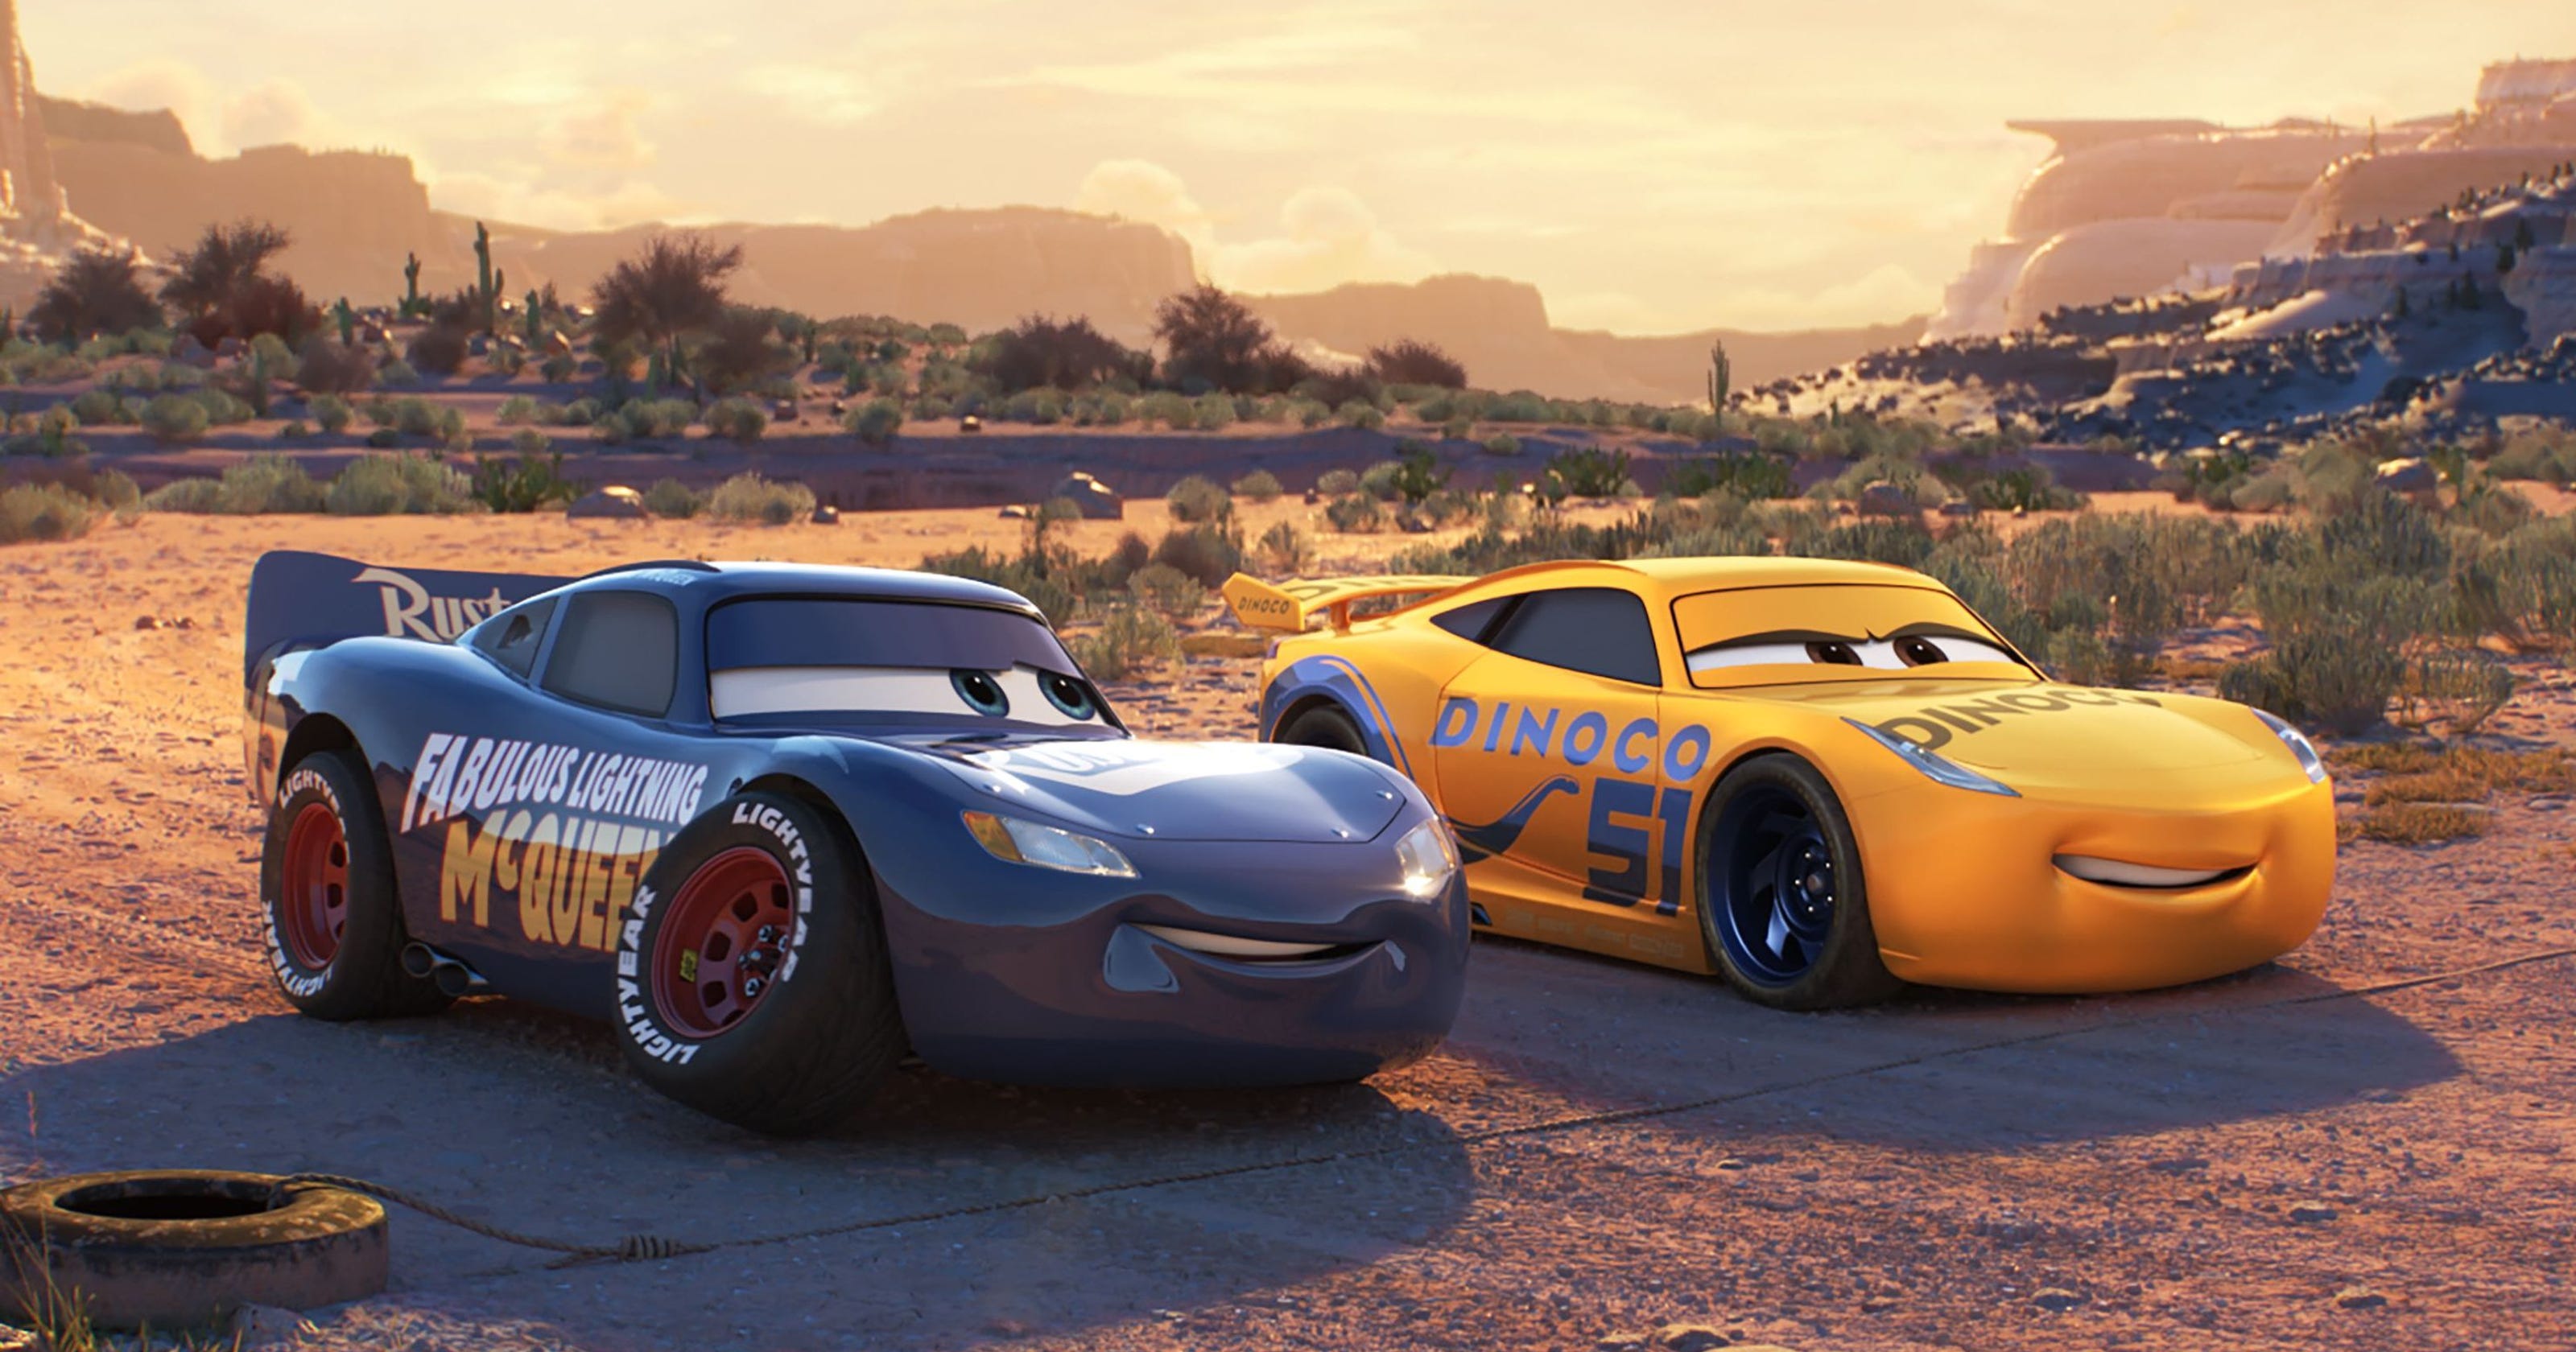 Cars 4 Characters, Release Date, Cast, Plot, News